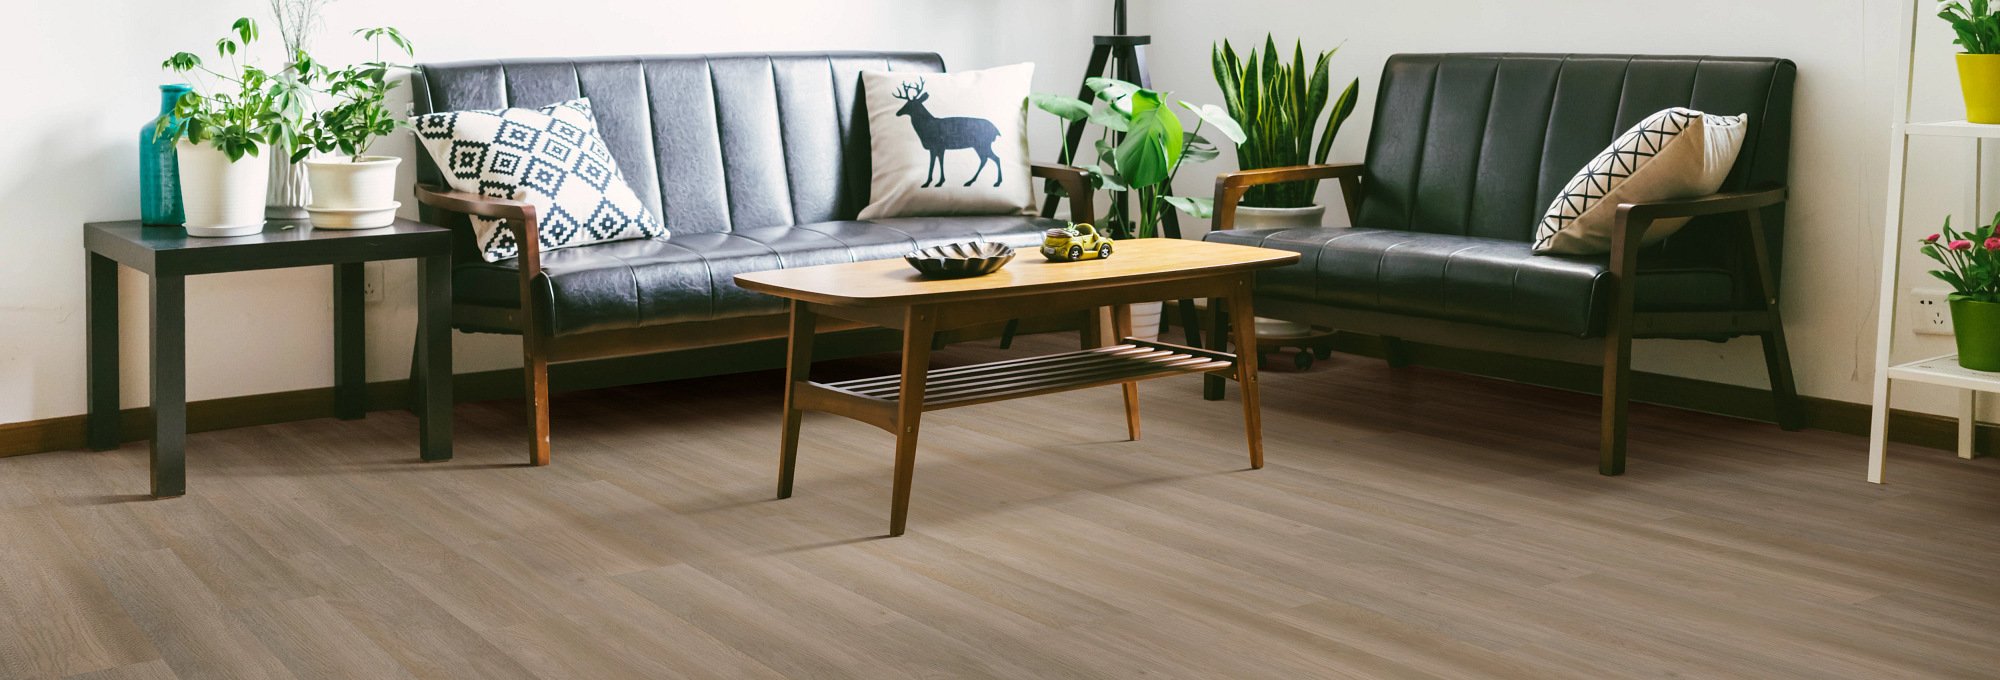 Laminate in Cawood Flooring Systems, West Chester